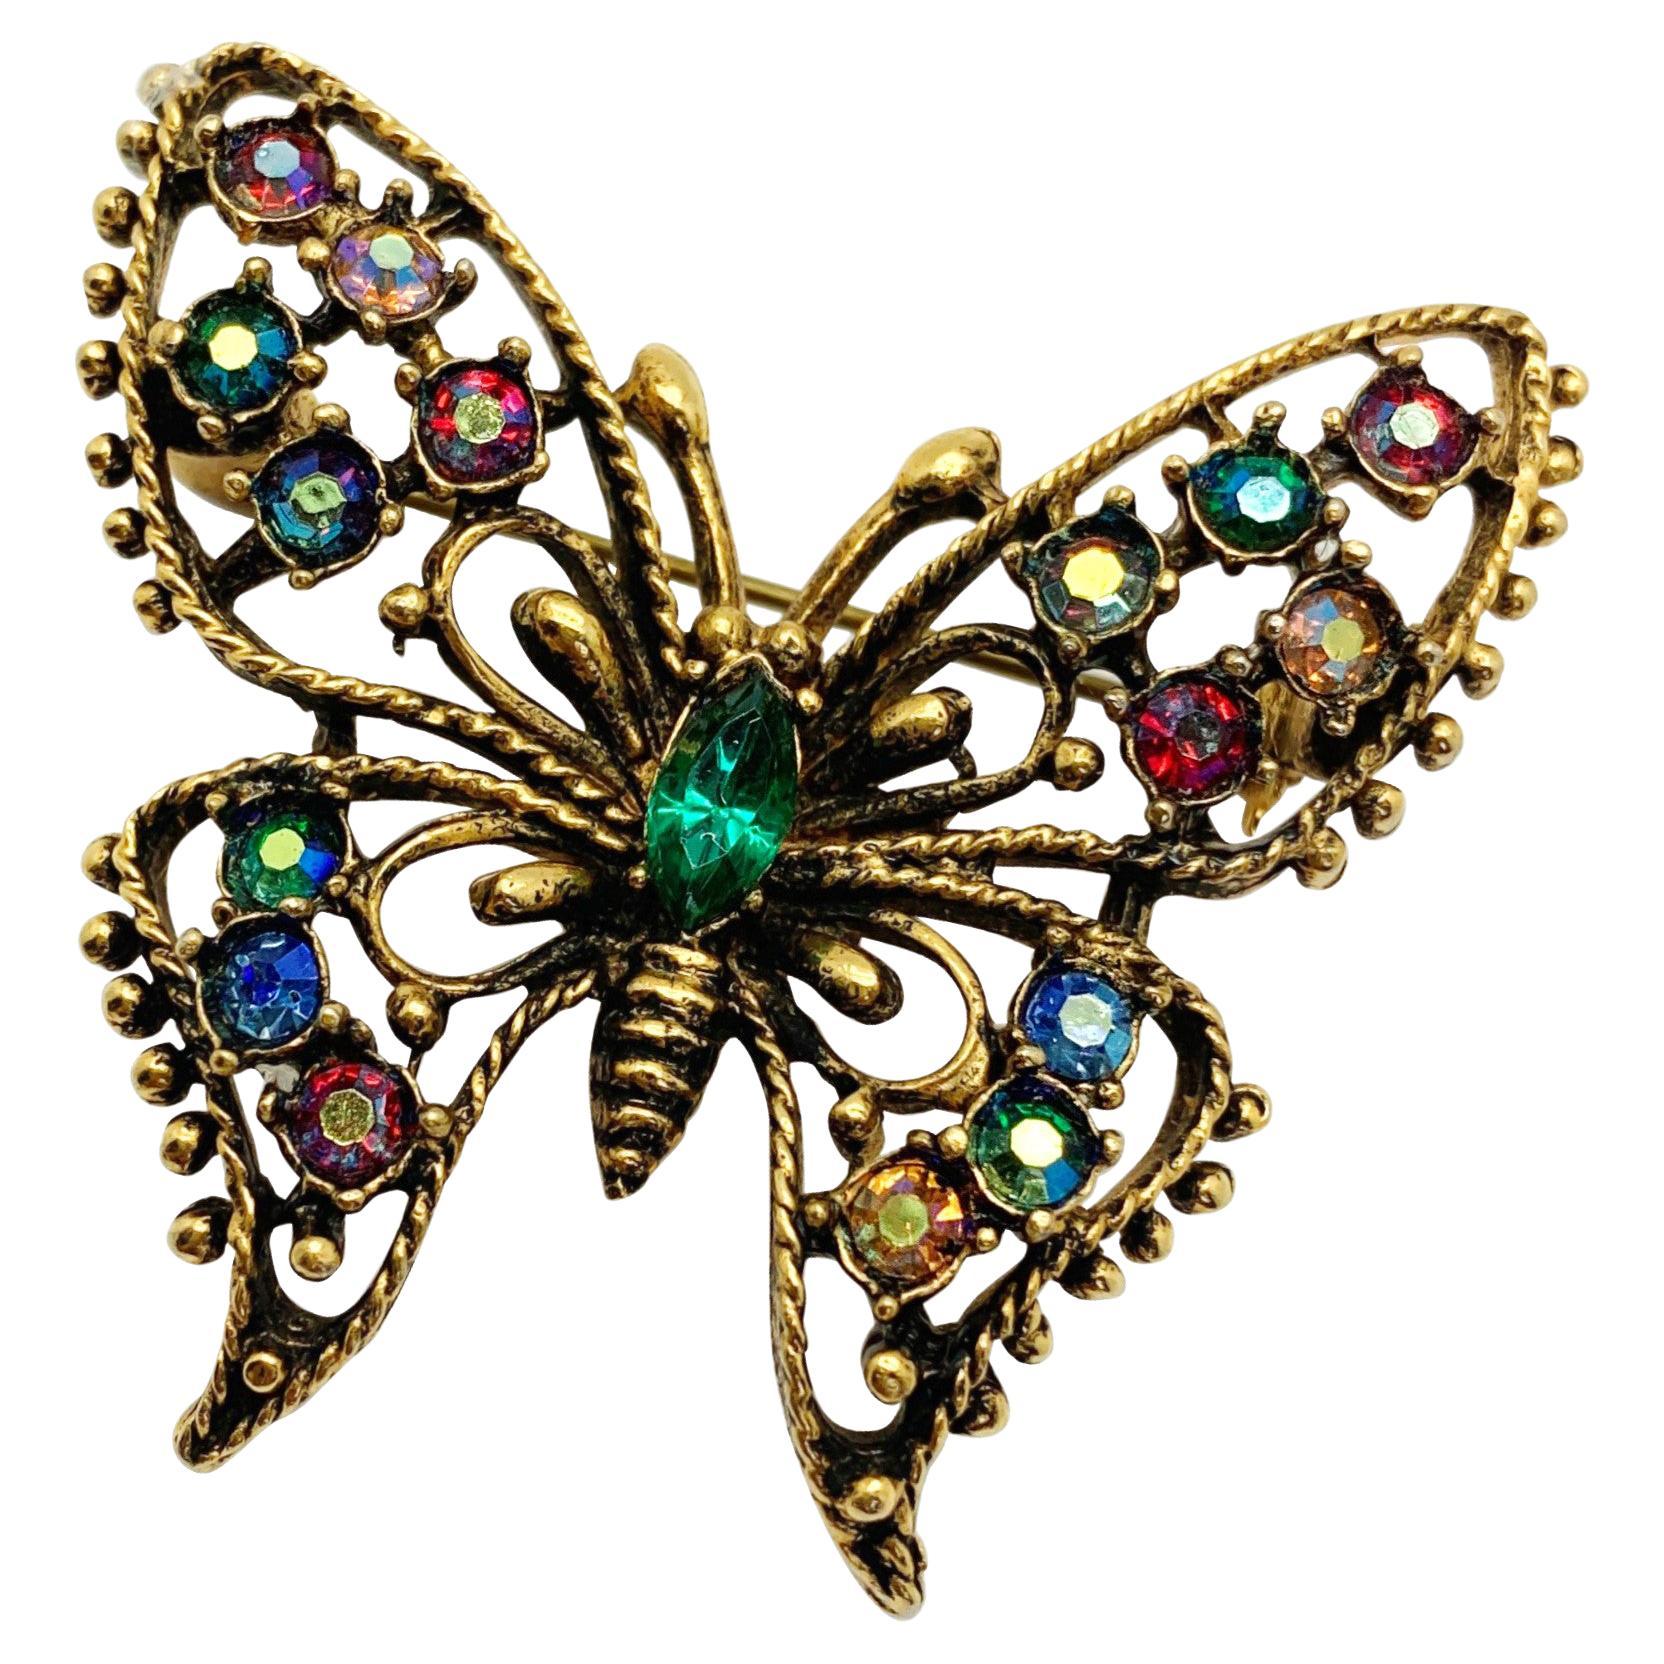 A gorgeous vintage crystal butterfly brooch. Featuring a wonderful rainbow of aurora borealis glass crystal stones in an open antiqued gold framework, depicting a wings outstretched butterfly. 
Vintage Condition: Very good without damage or